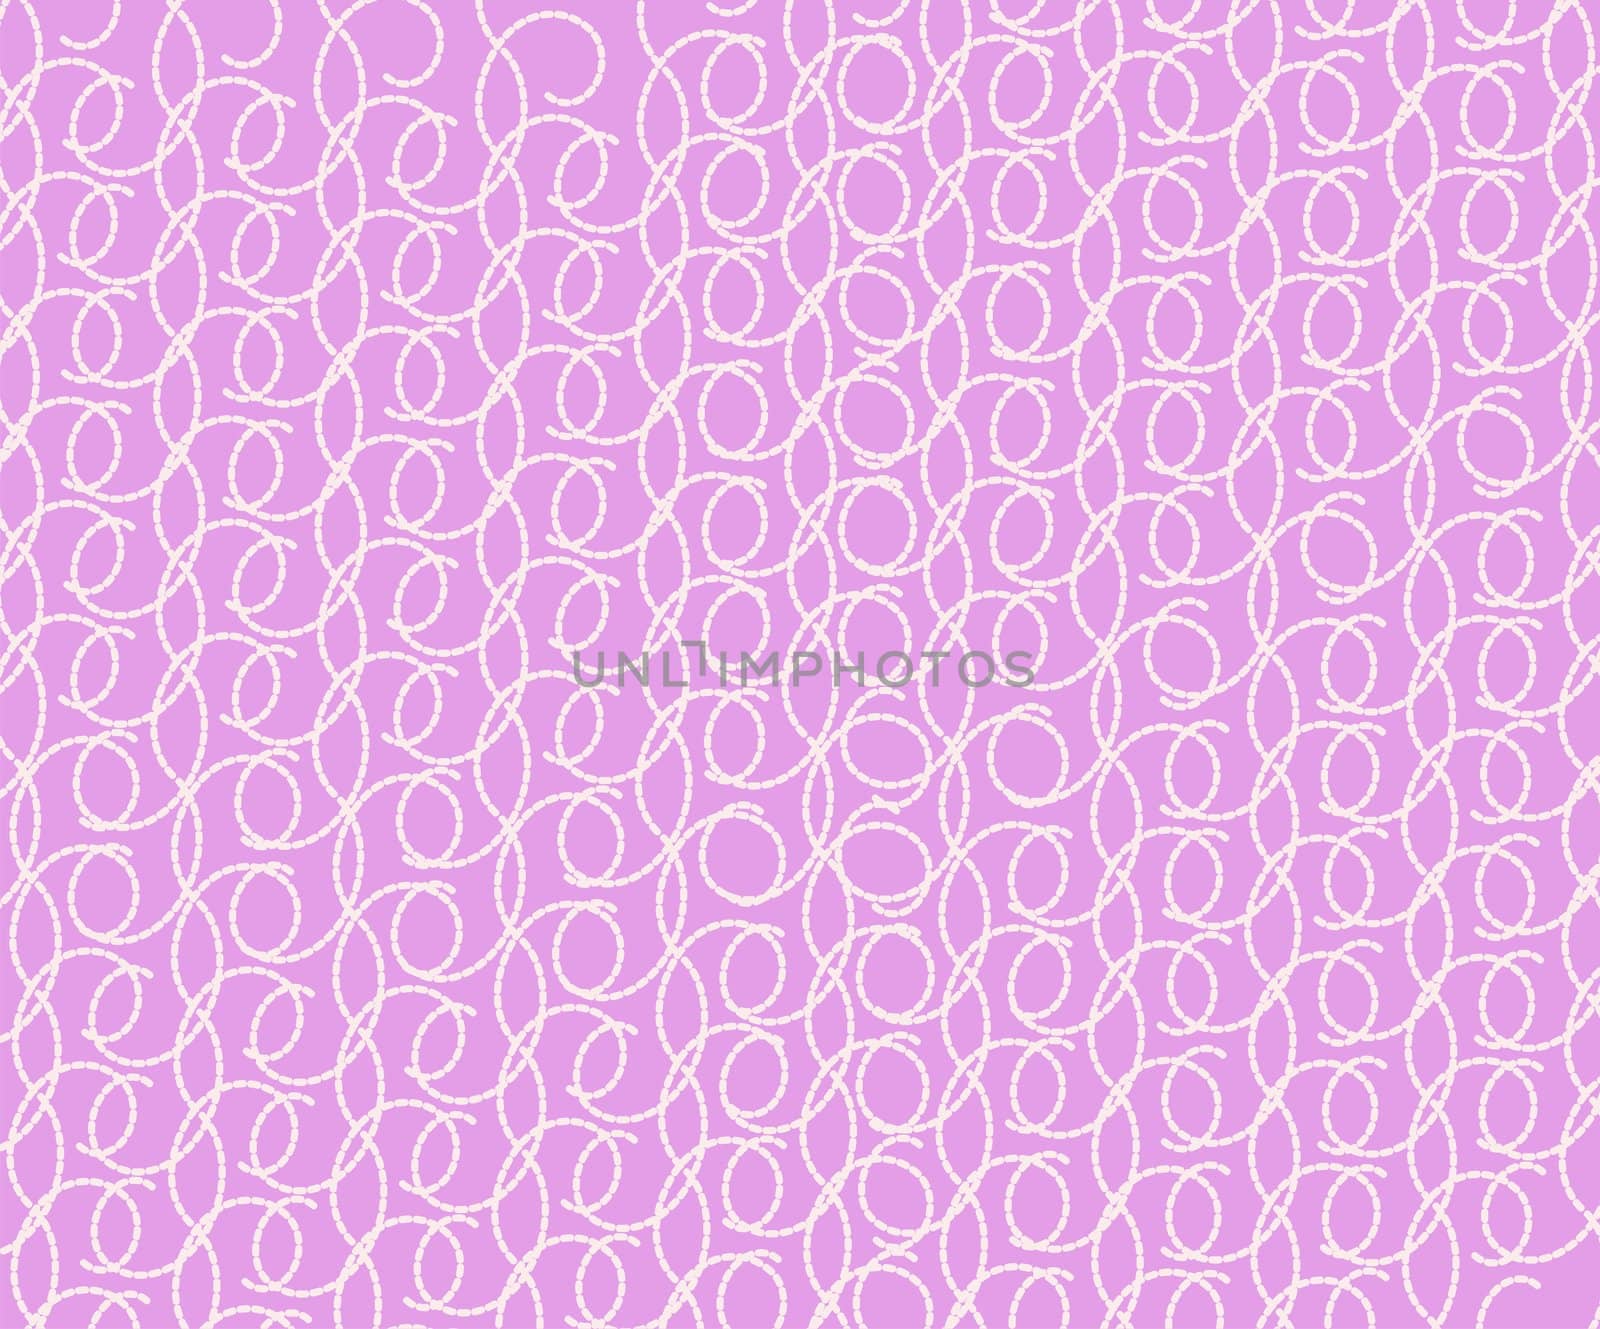 PINK BACKGROUND WITH A GRACEFUL PATTERN by likakoyn